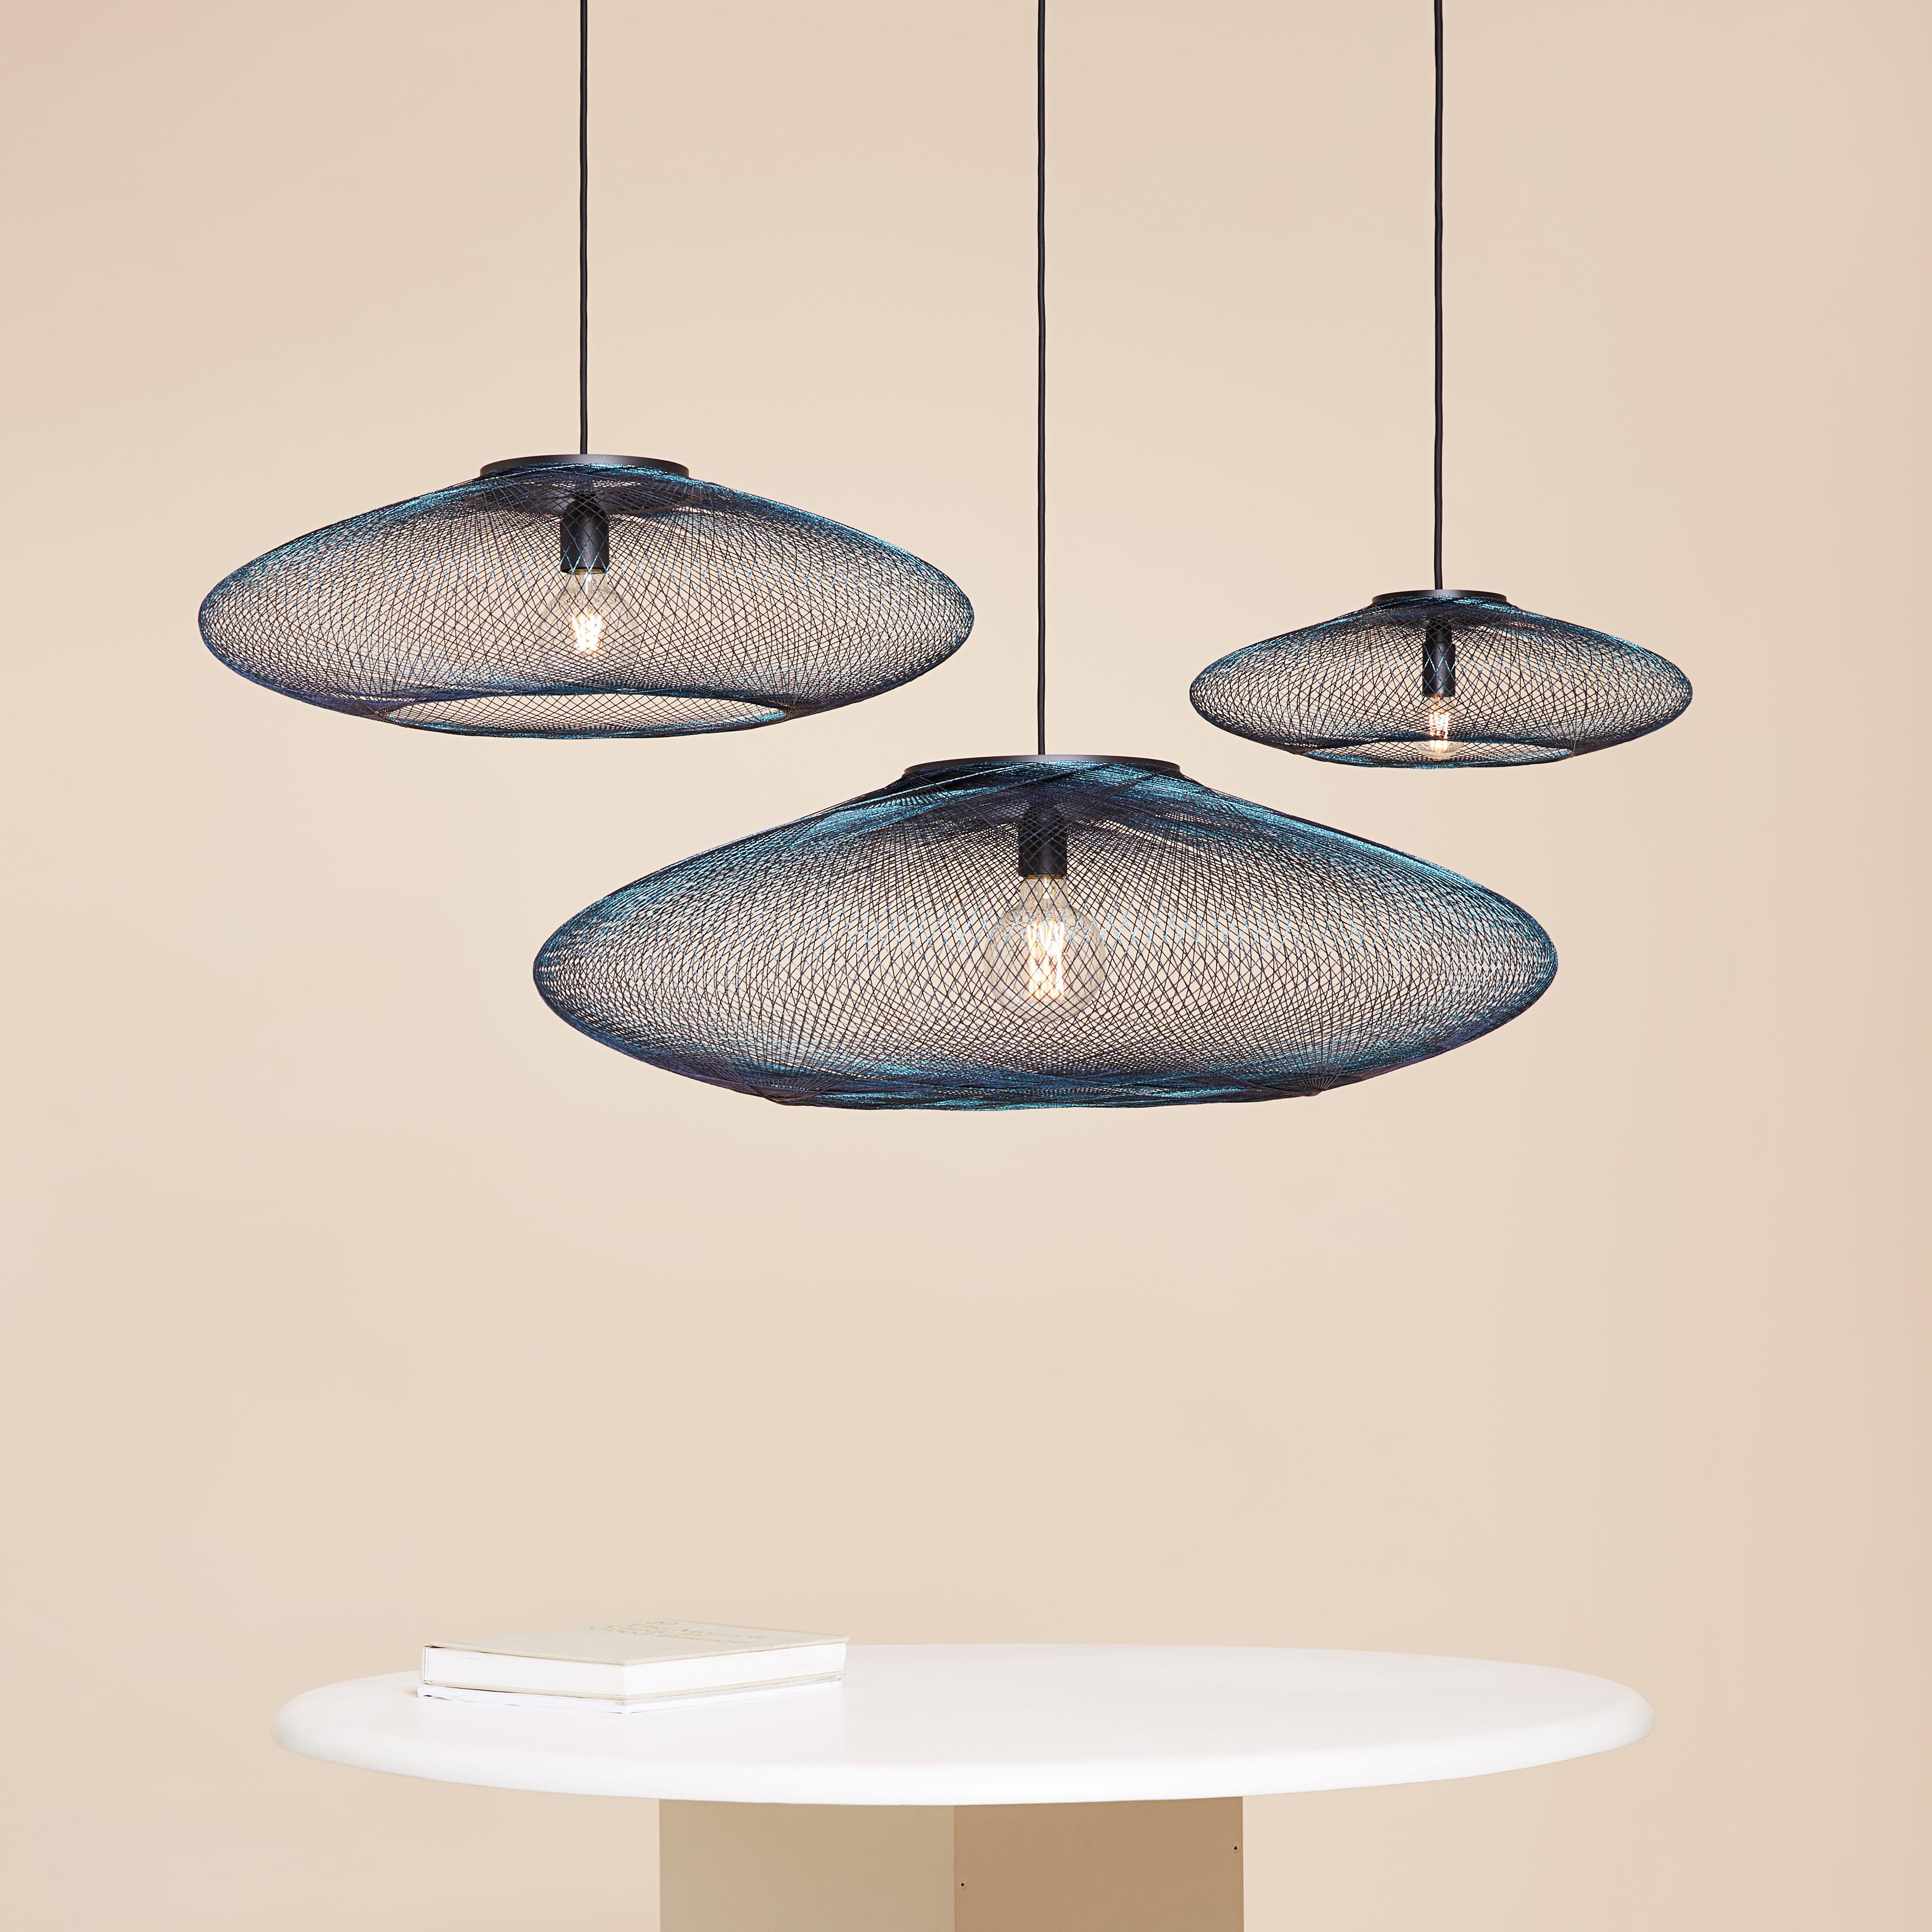 Large Iridescent UFO pendant lamp by Atelier Robotiq
Dimensions: D 80 x H 24 cm
Materials: Resin-impregnated industrial fiber, black coated stainless steel.
Available in different colors, 3 sizes, and in Full pattern or Open pattern.

All our